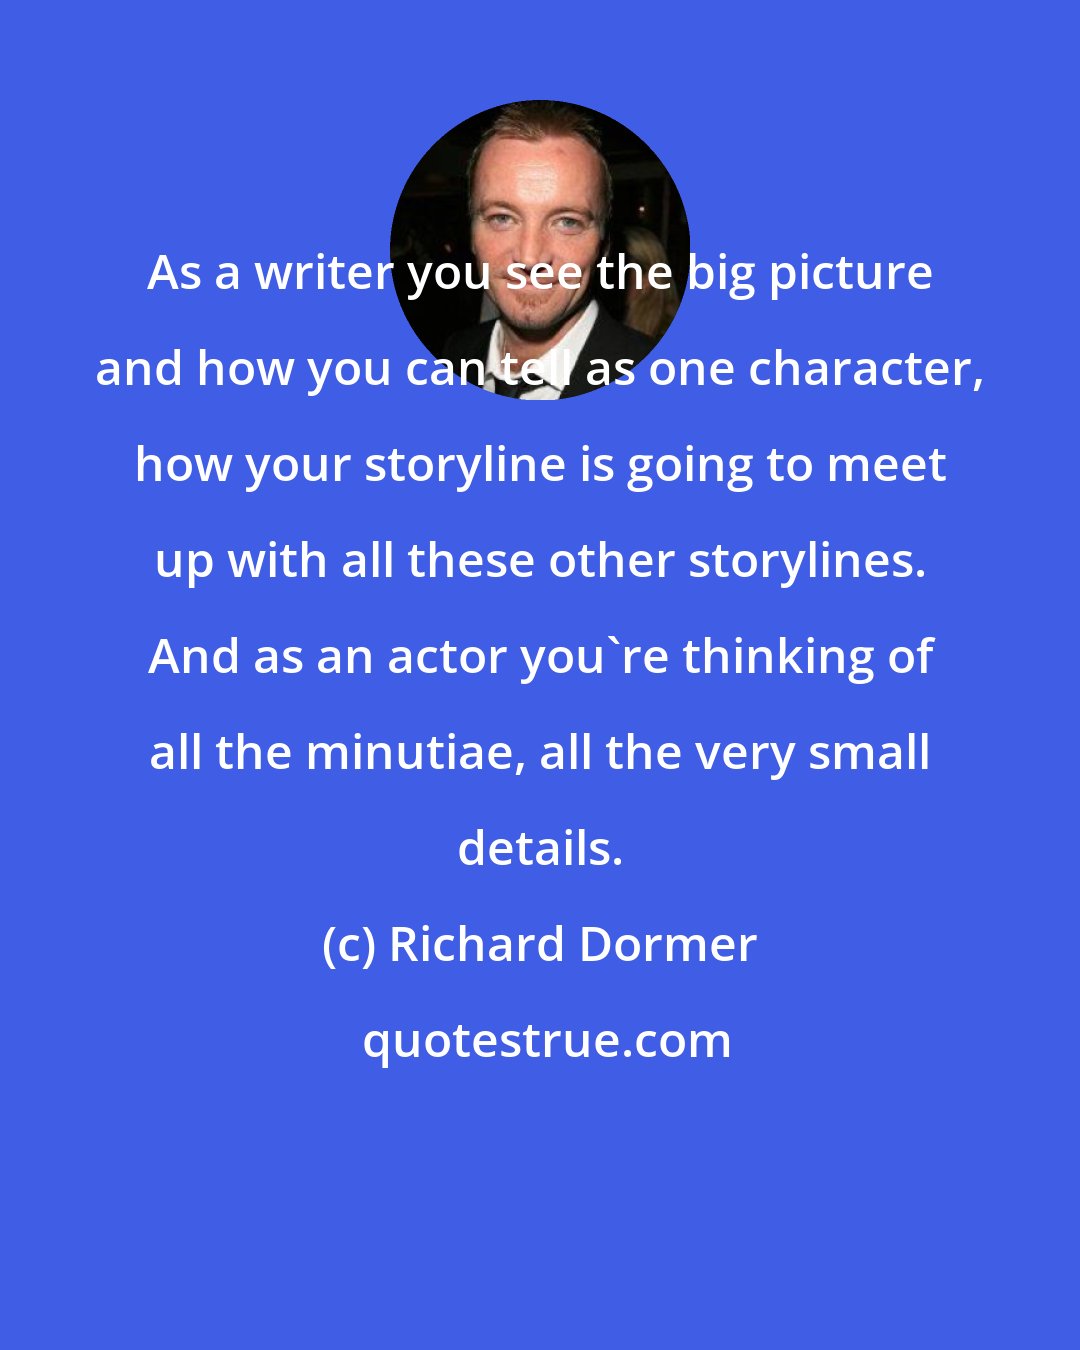 Richard Dormer: As a writer you see the big picture and how you can tell as one character, how your storyline is going to meet up with all these other storylines. And as an actor you're thinking of all the minutiae, all the very small details.